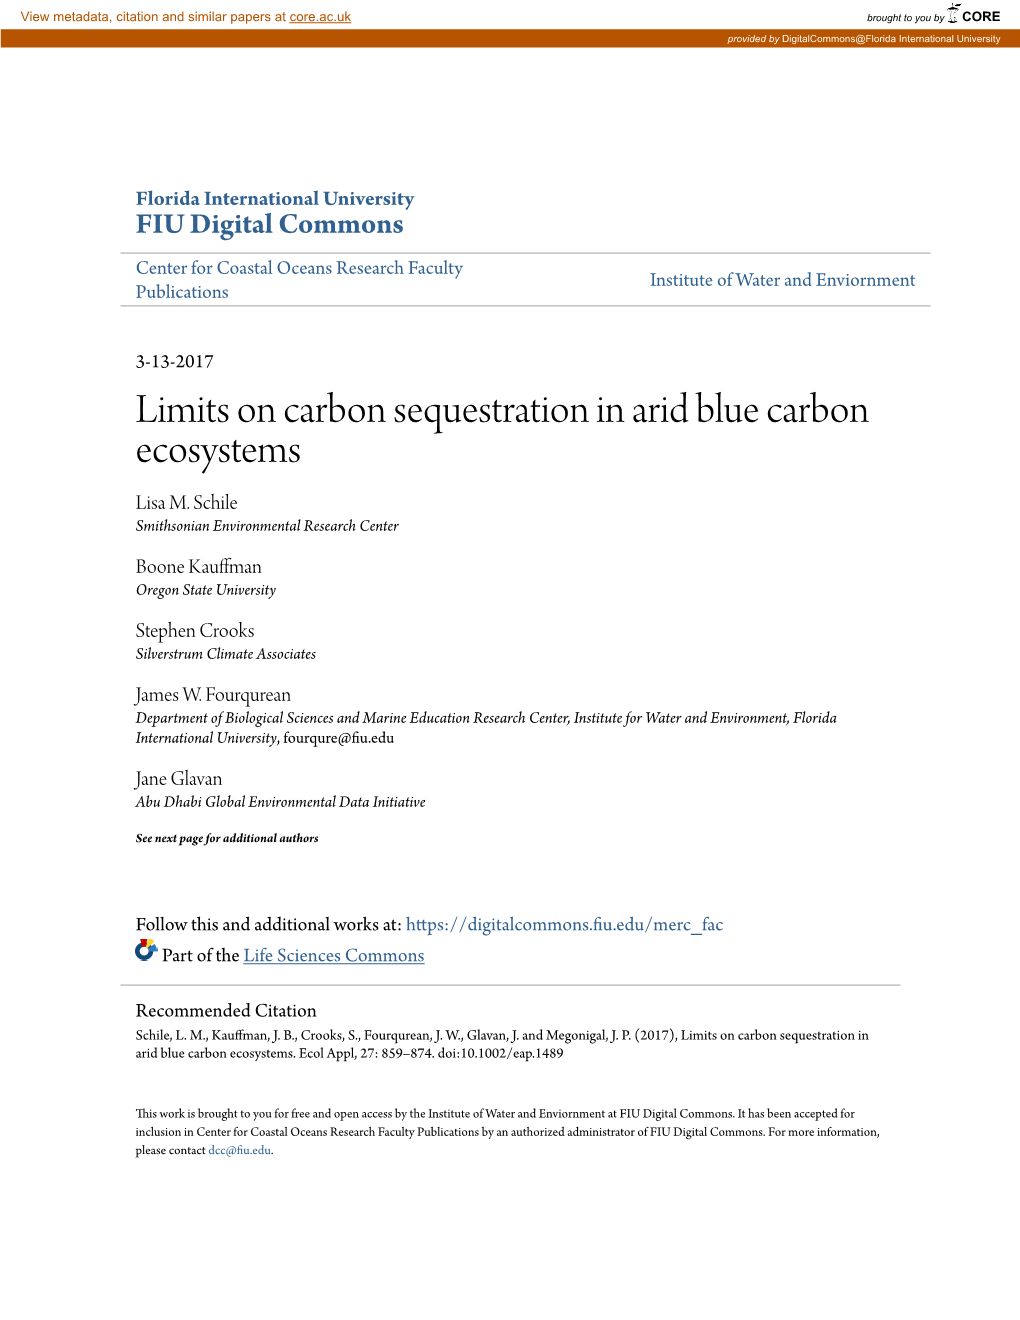 Limits on Carbon Sequestration in Arid Blue Carbon Ecosystems Lisa M